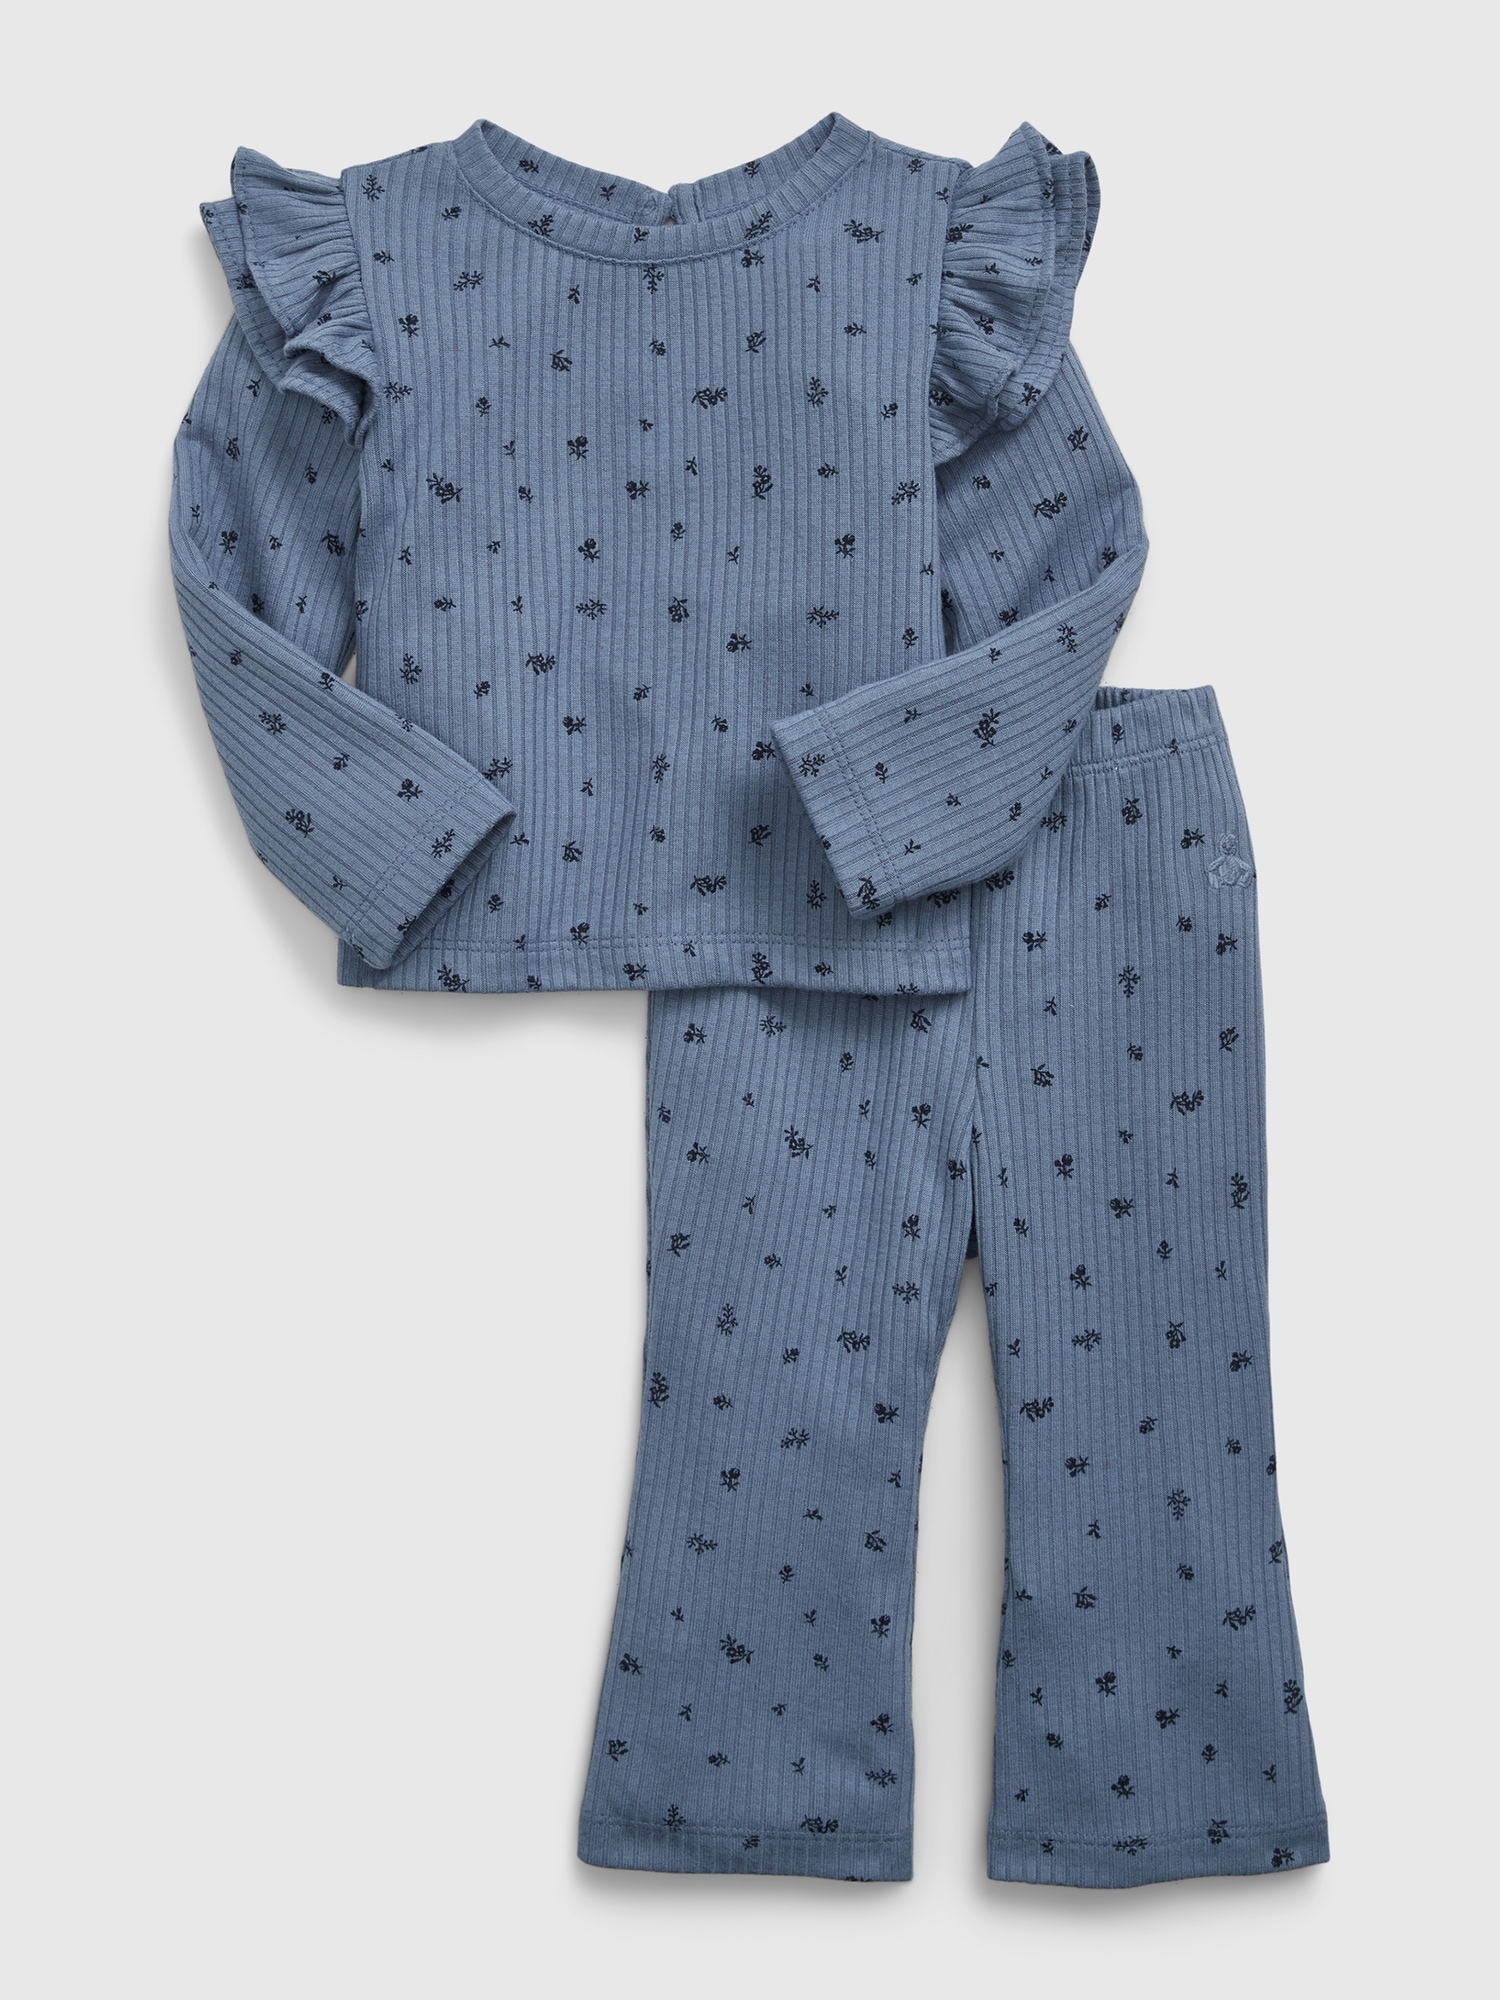 Gap Baby Rib Two-Piece Outfit Set